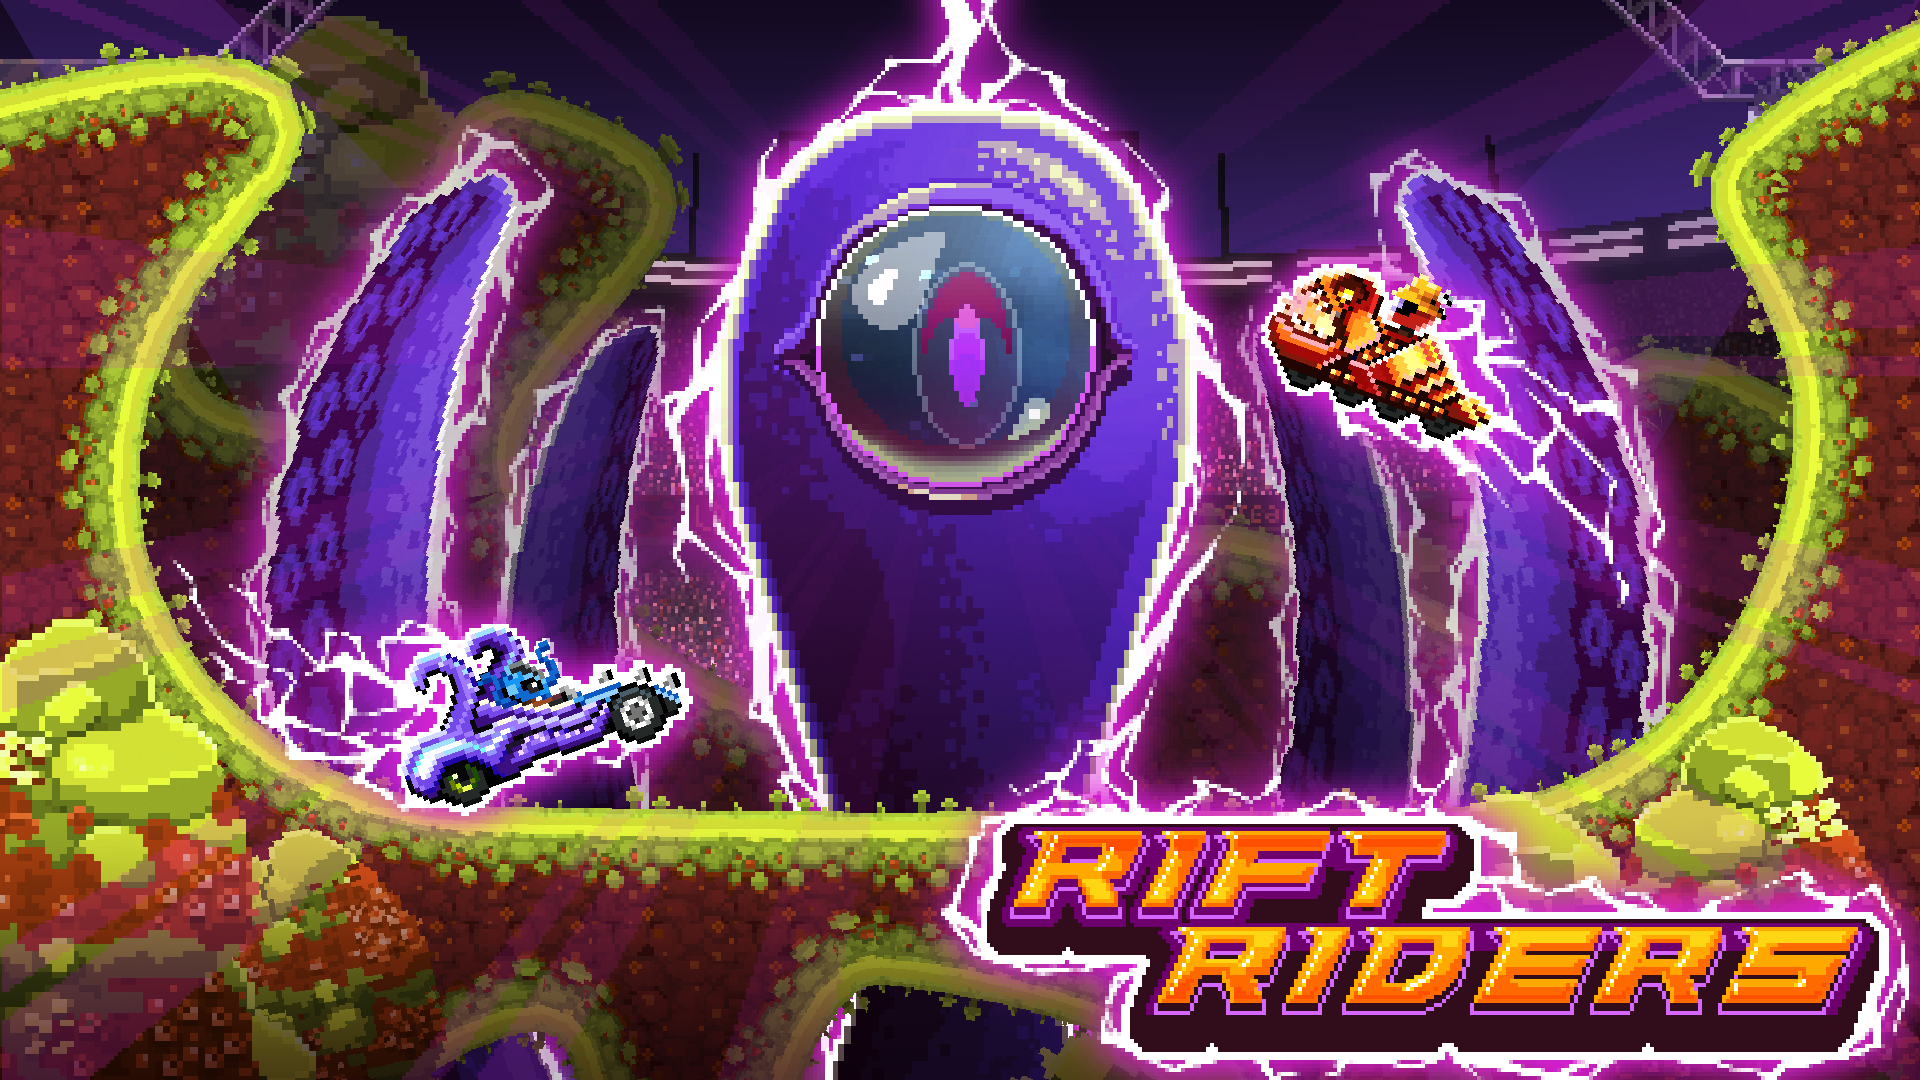 Free Download Drive Ahead Rift Riders Album On Imgur [1920x1080] For Your Desktop Mobile